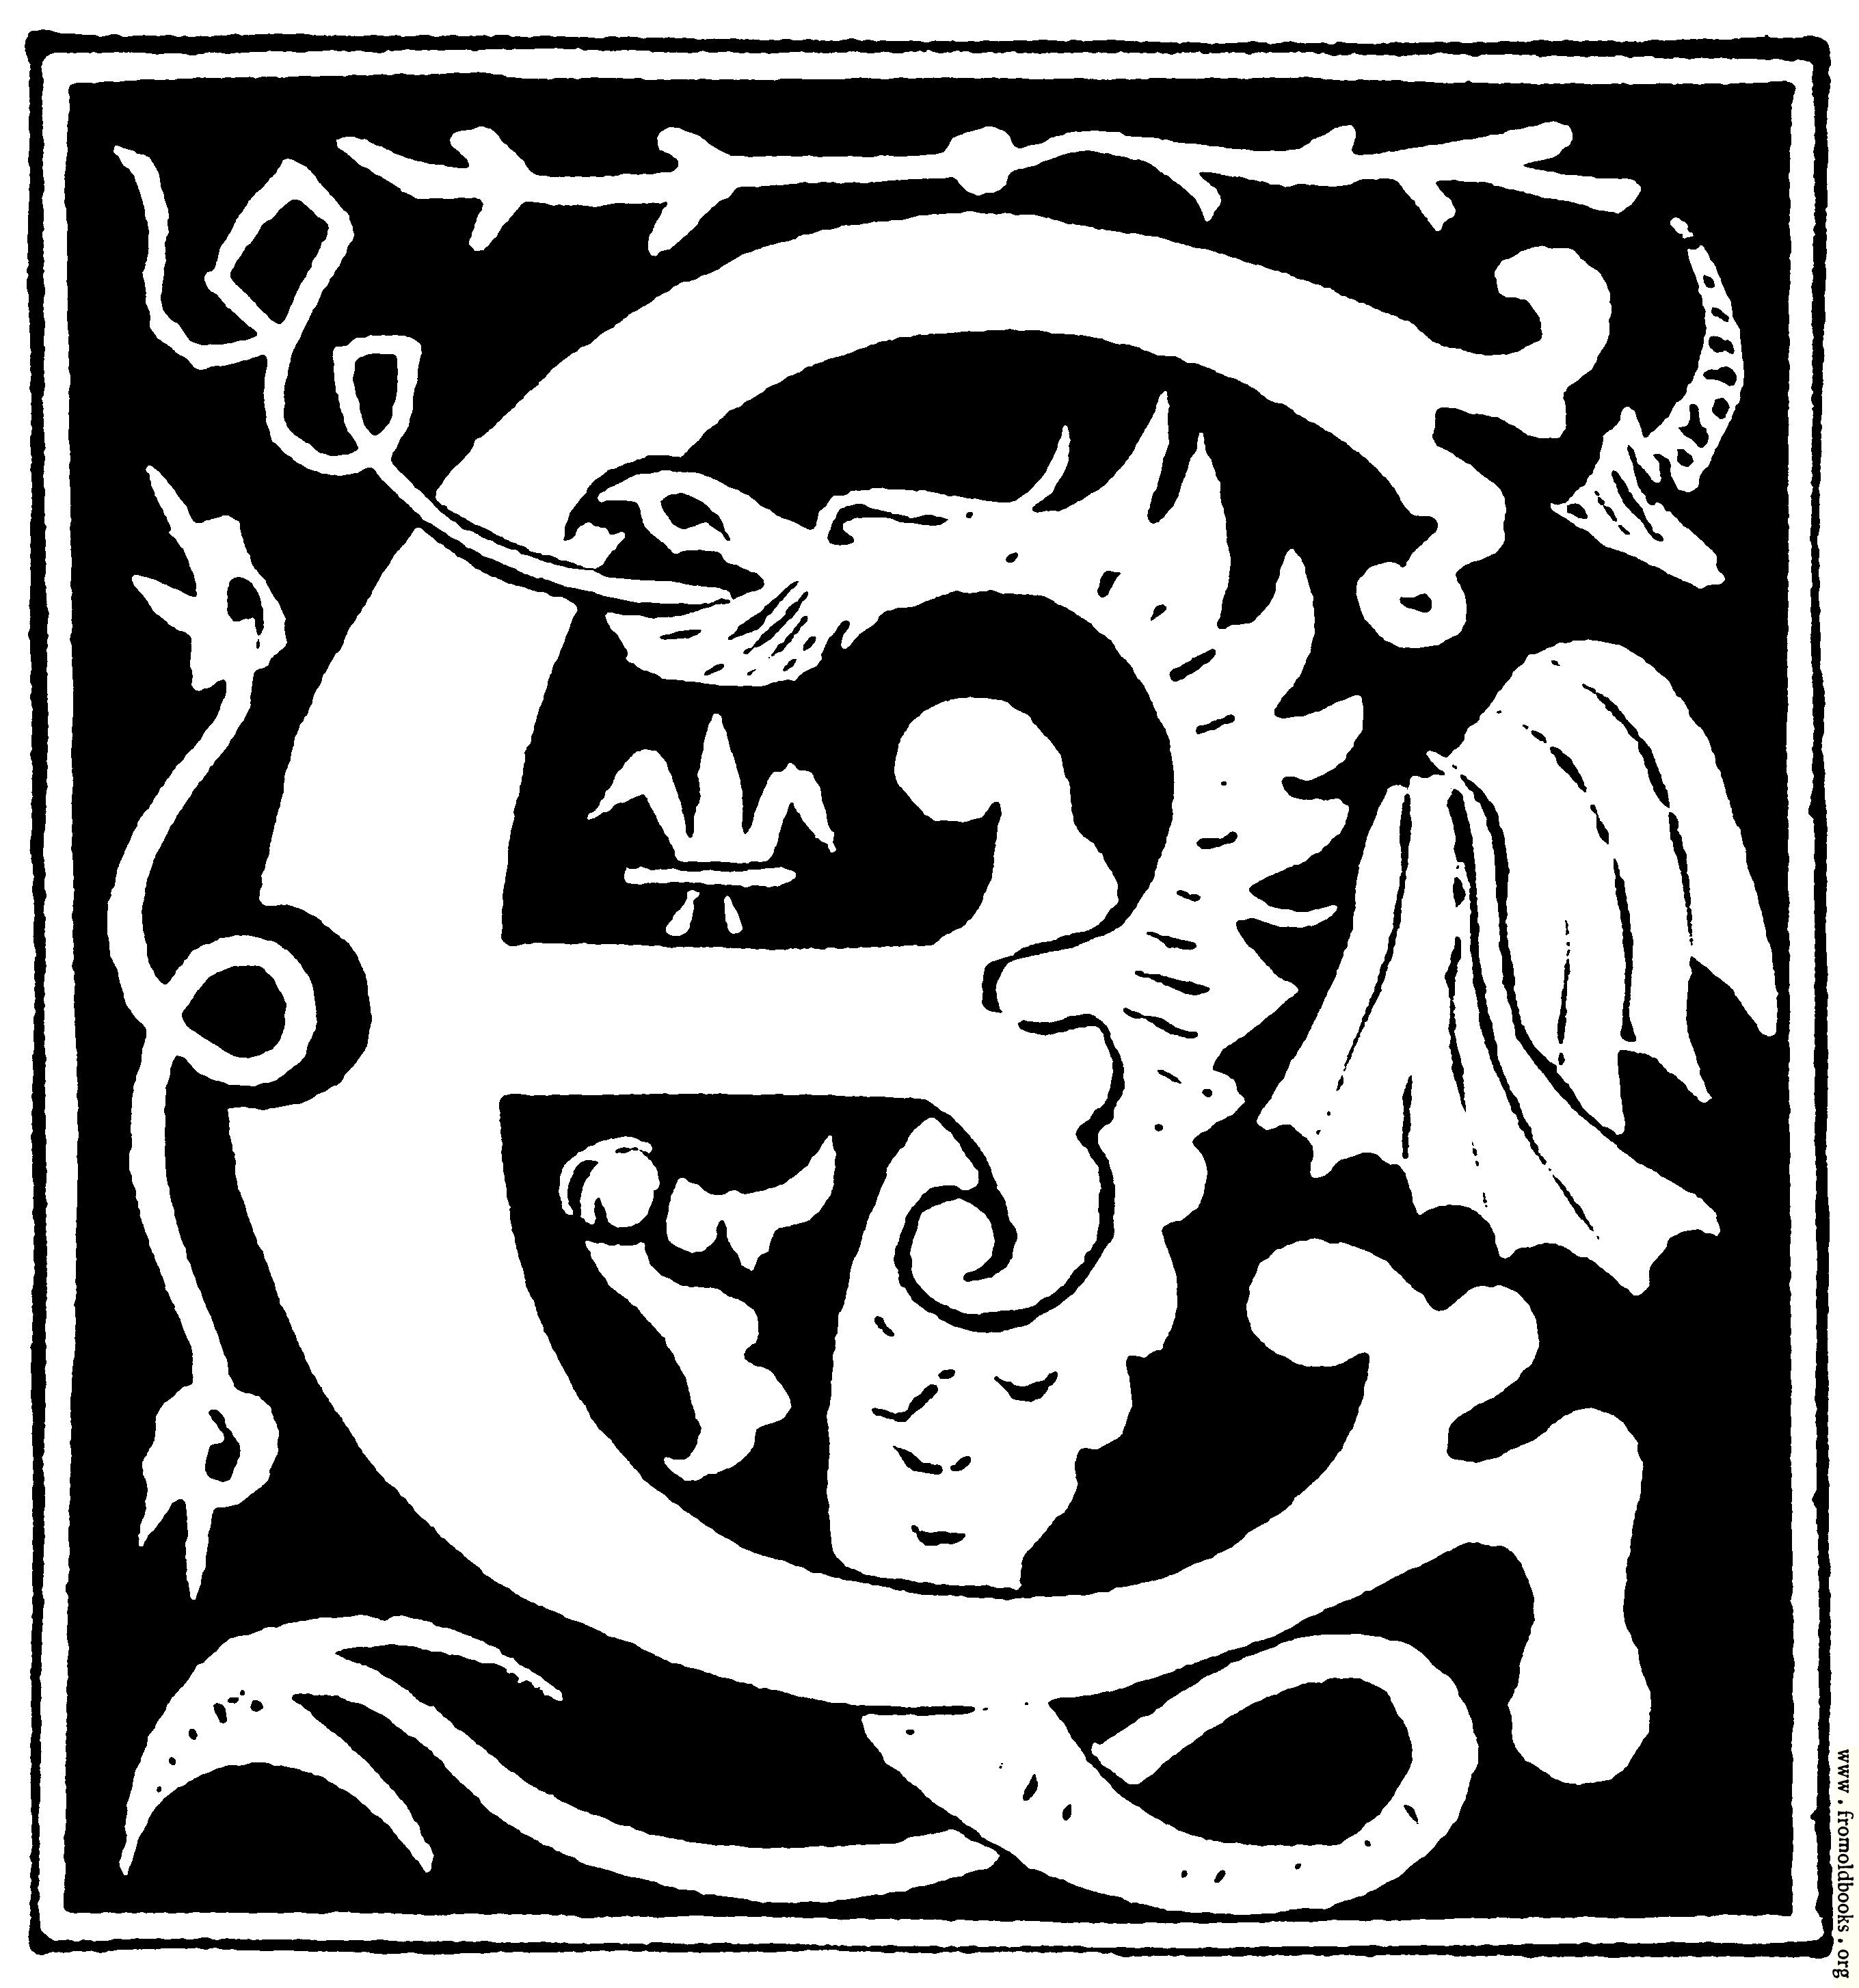 FOBO - Decorative initial letter “E” from 16th Century